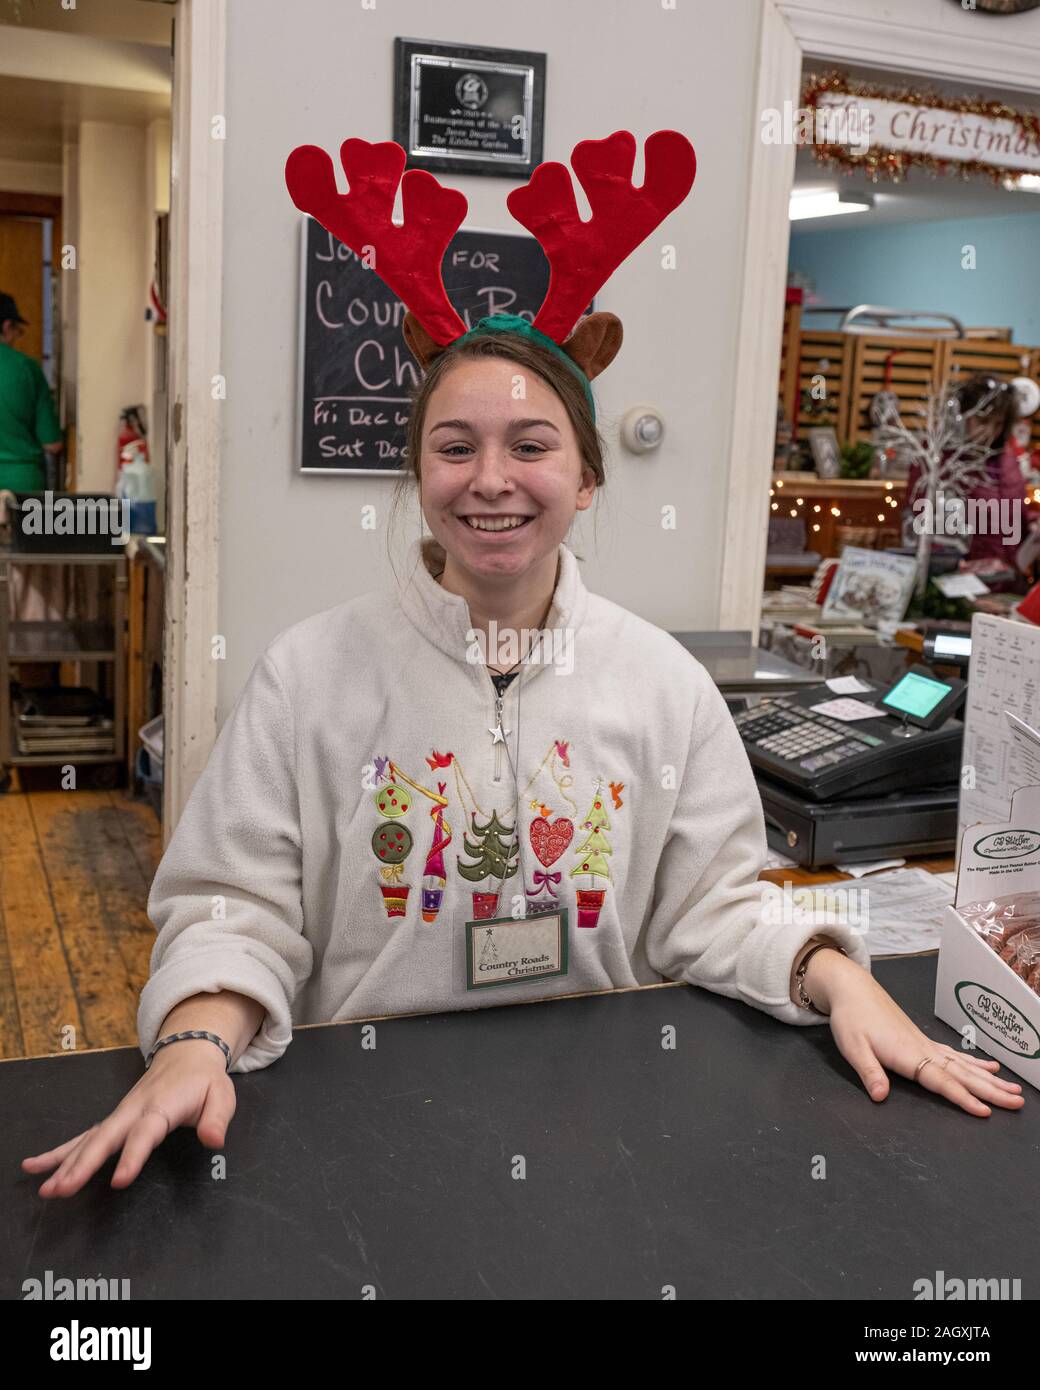 Employees at a store at Christmas time Stock Photo